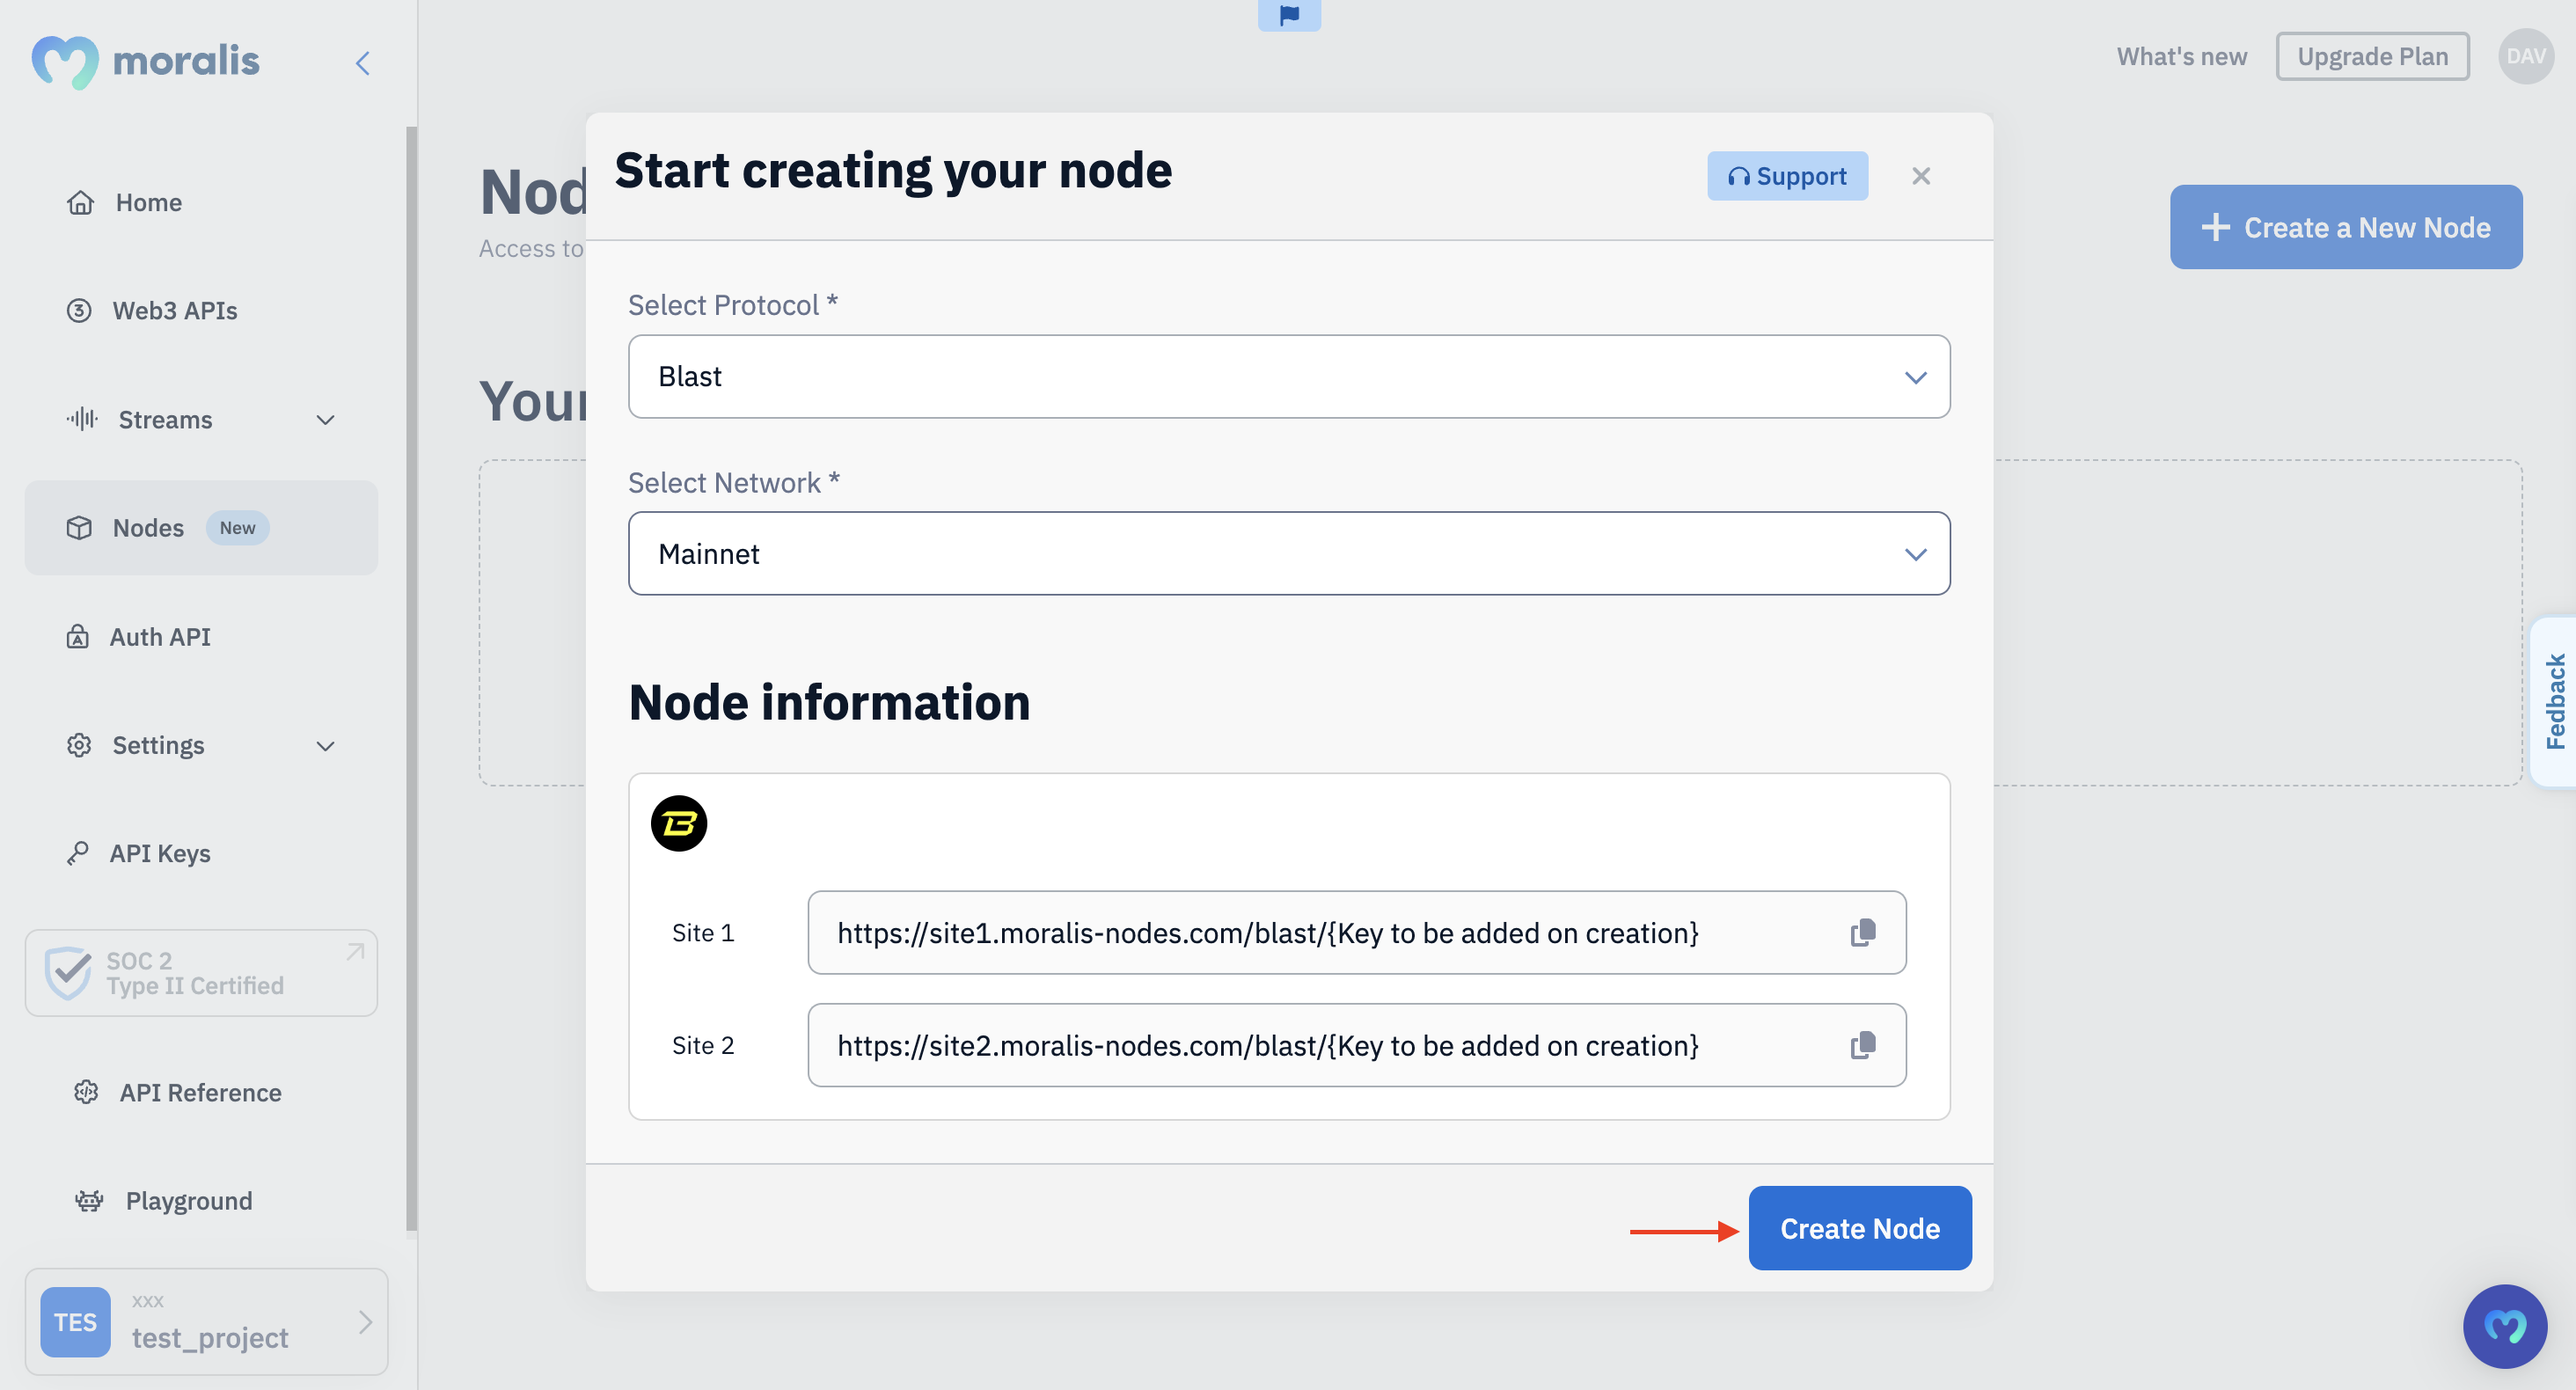 Red arrow pointing at the "Create Node" button during Blast nodes configurations.